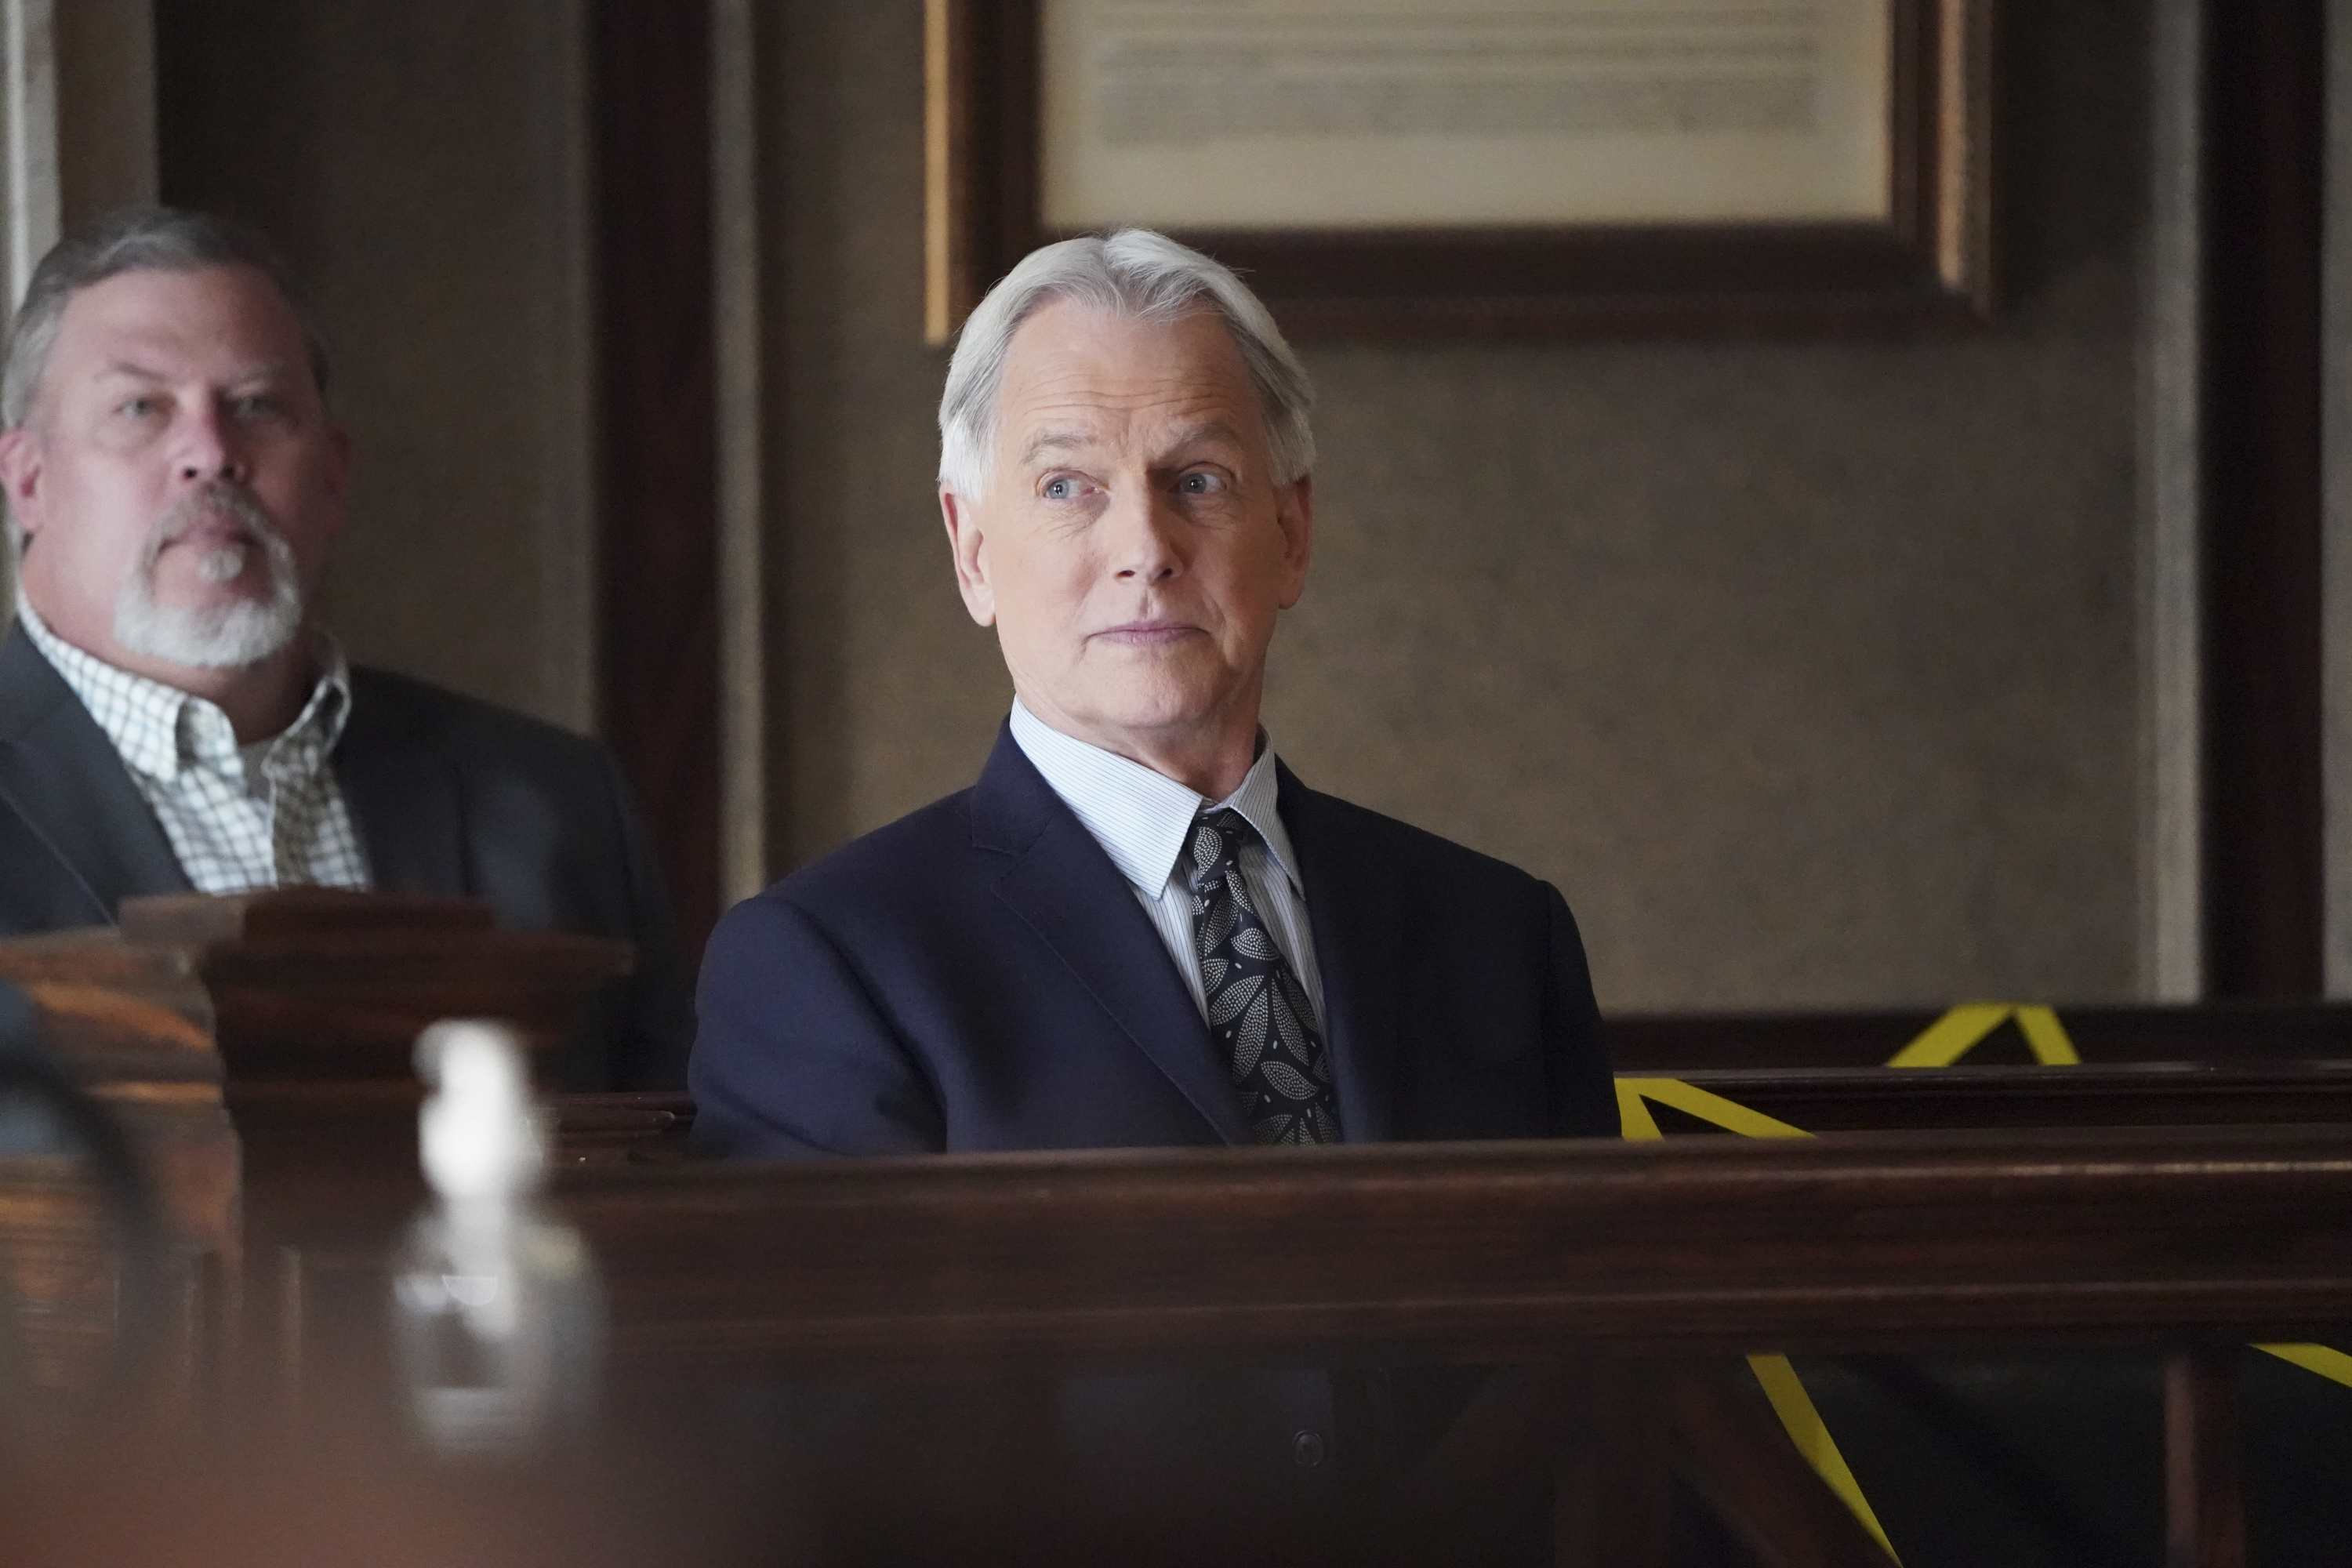 Close-up of Mark in a courtroom in a suit and tie from a TV show